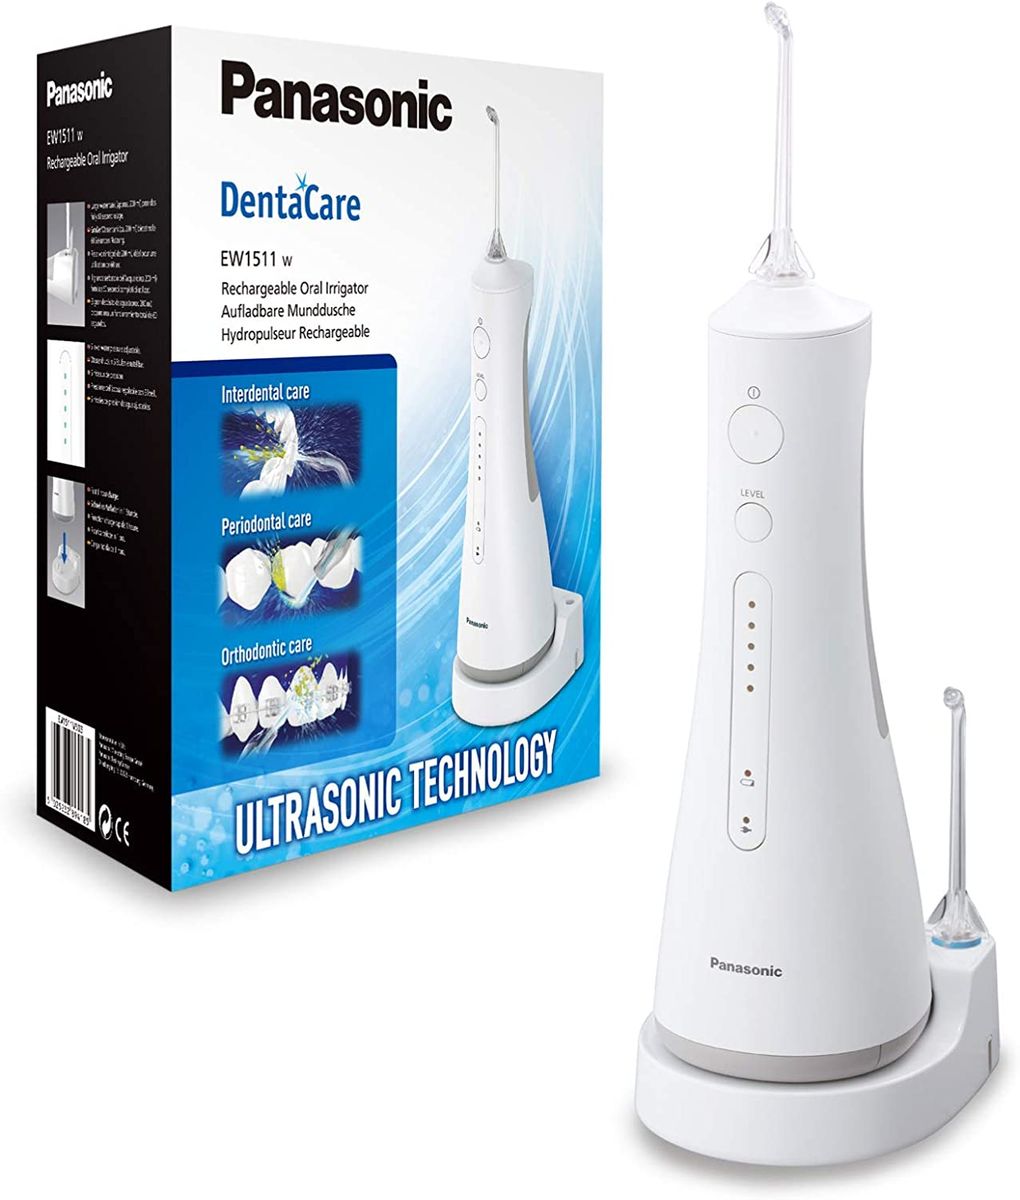 Panasonic Ultra Sonic Oral Irrigator (Electric, Interdental Cleaning, Integrated Charging Station) White